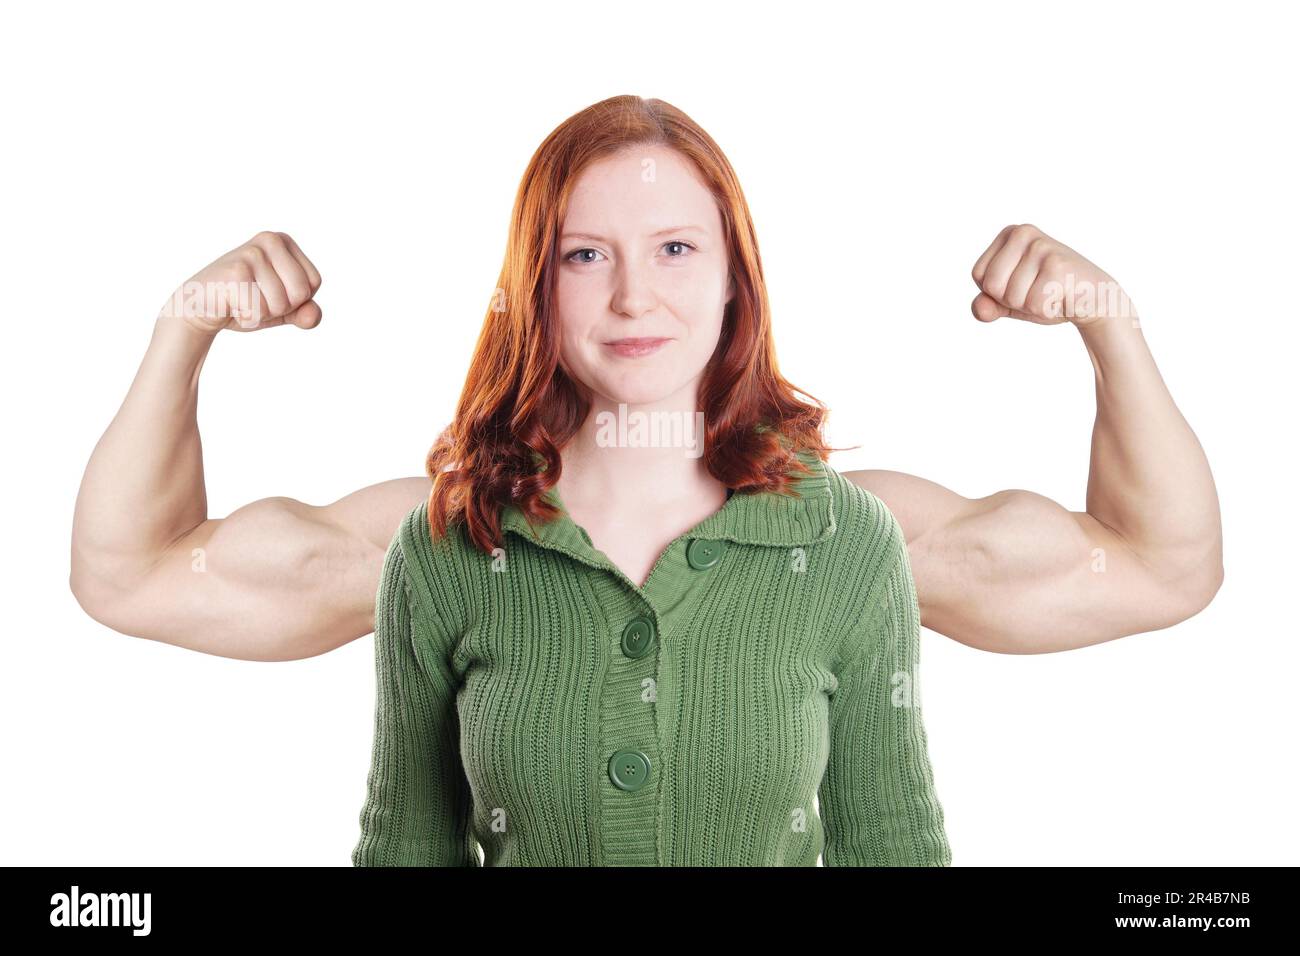 confident young woman with superimposed muscular arms power concept Stock Photo